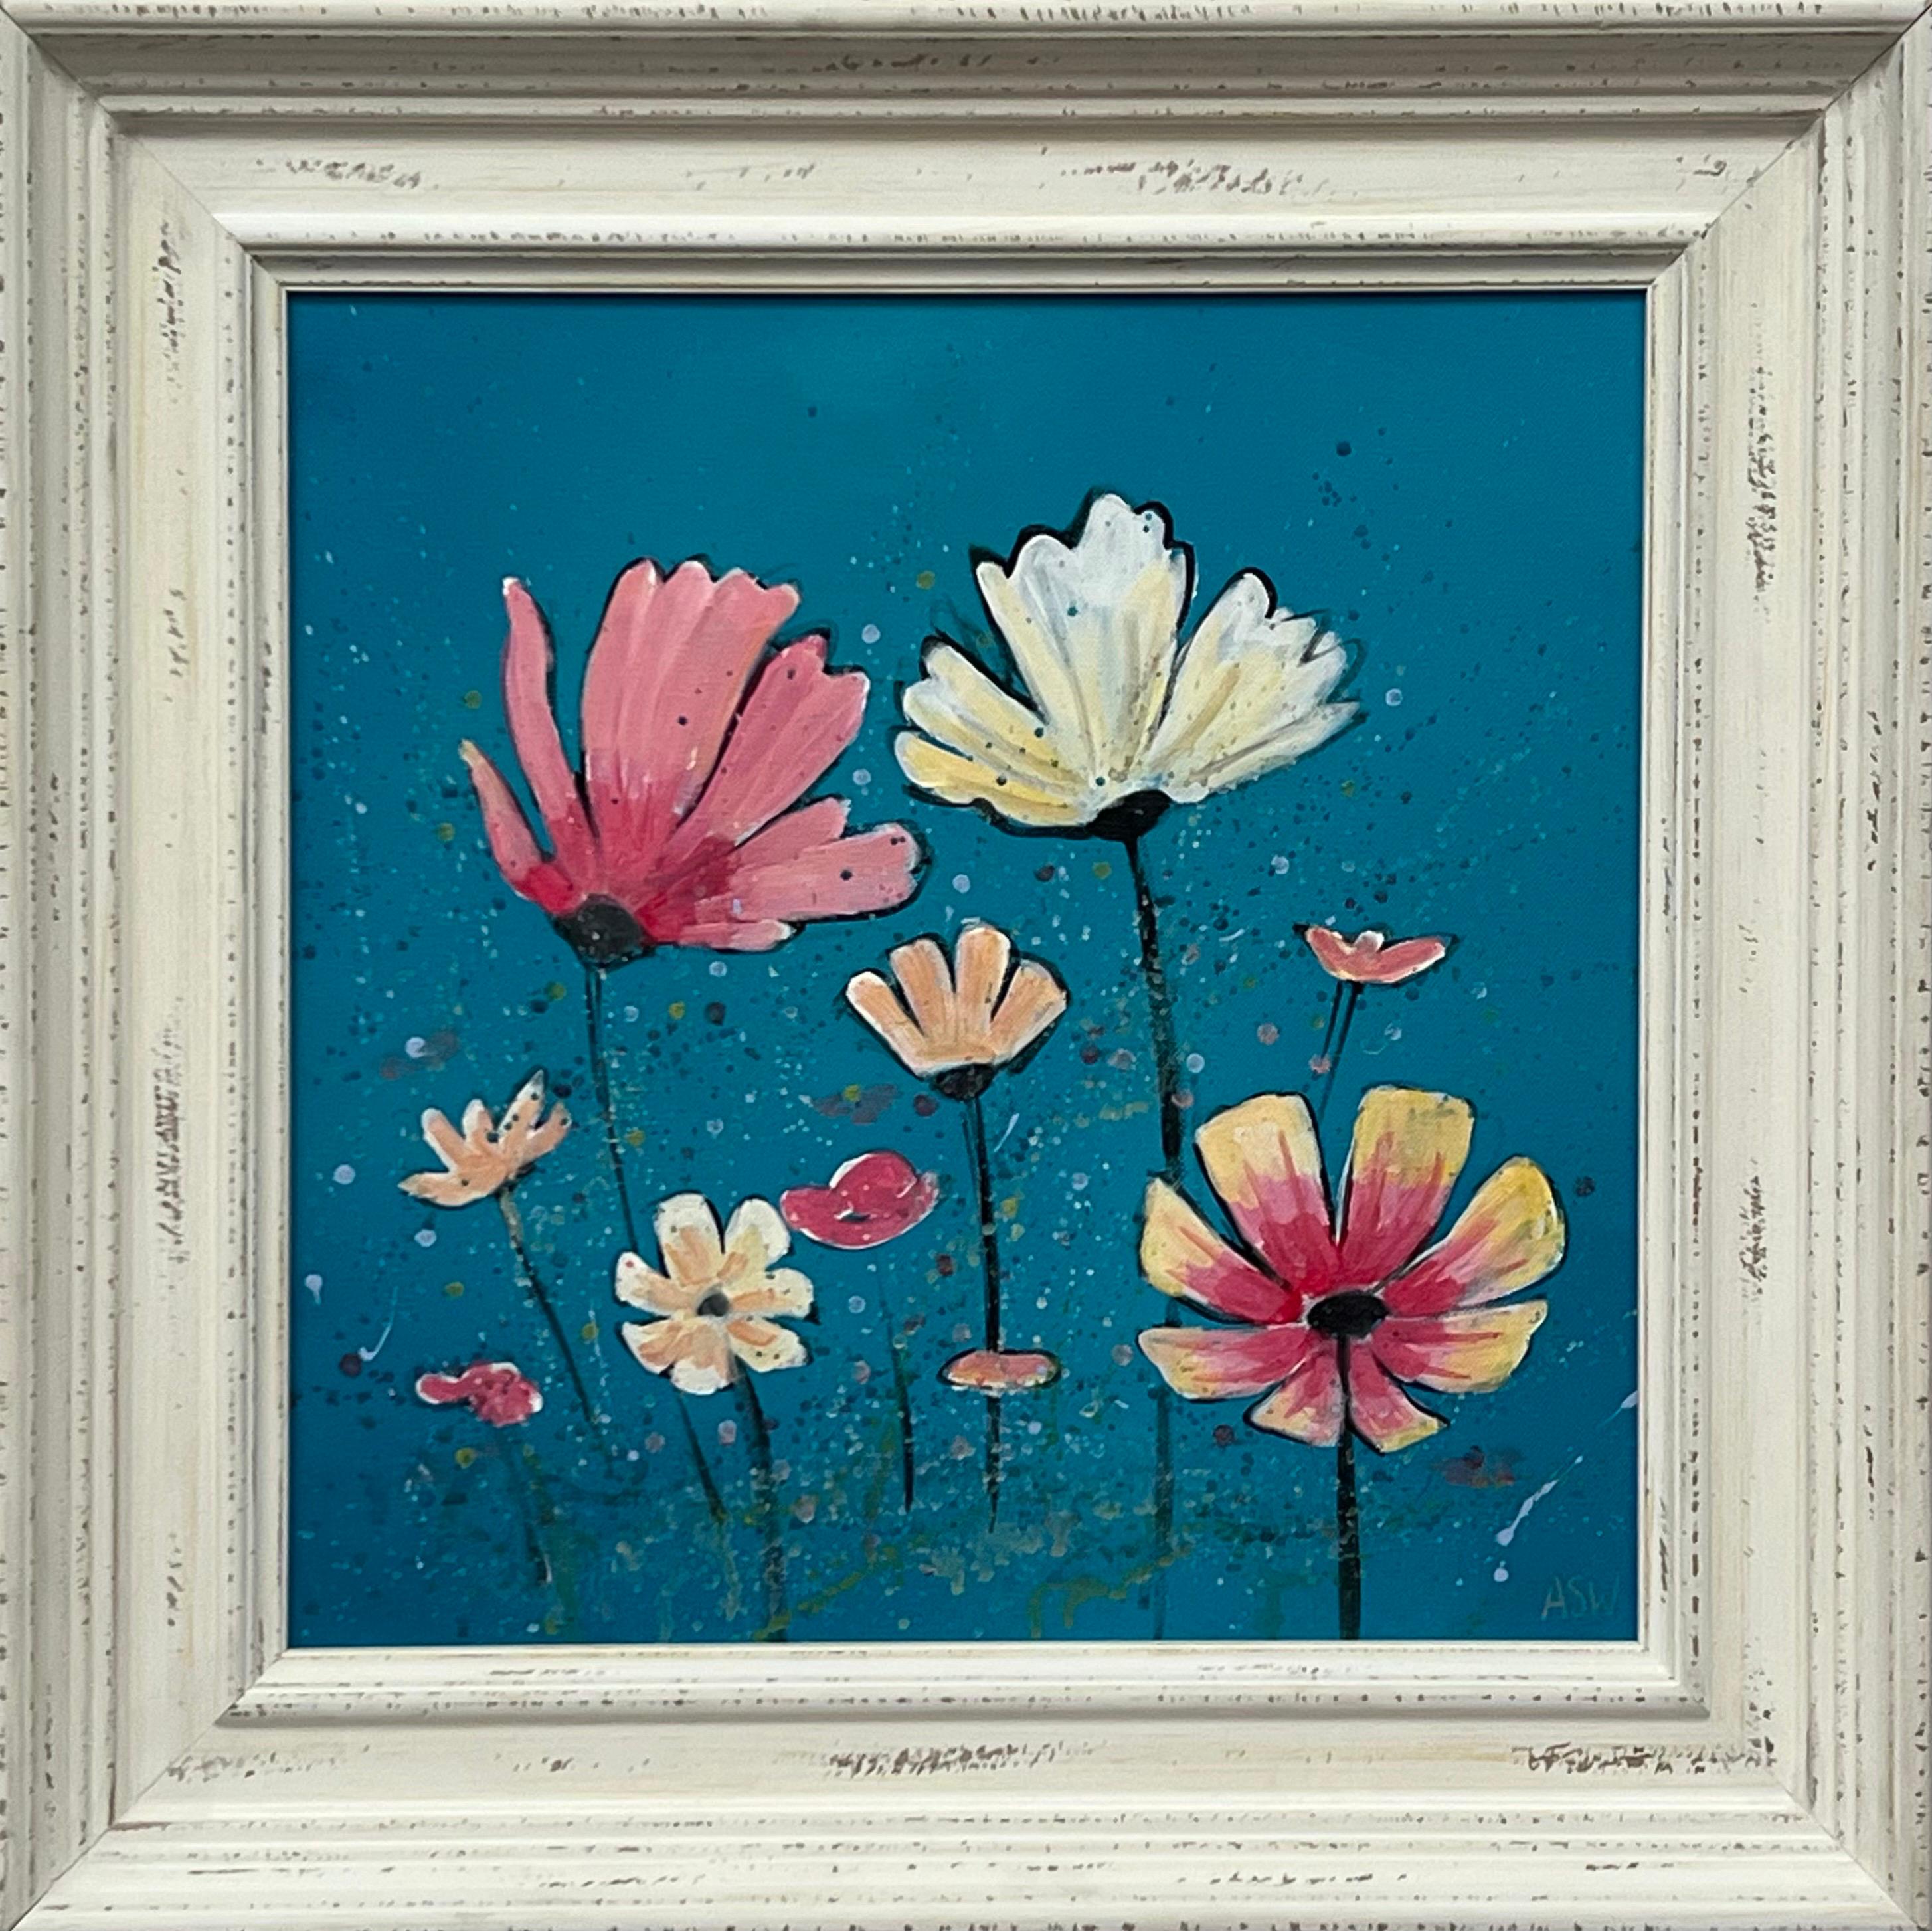 Design Study of Wild Pink & White Flowers on Turquoise by Contemporary Artist